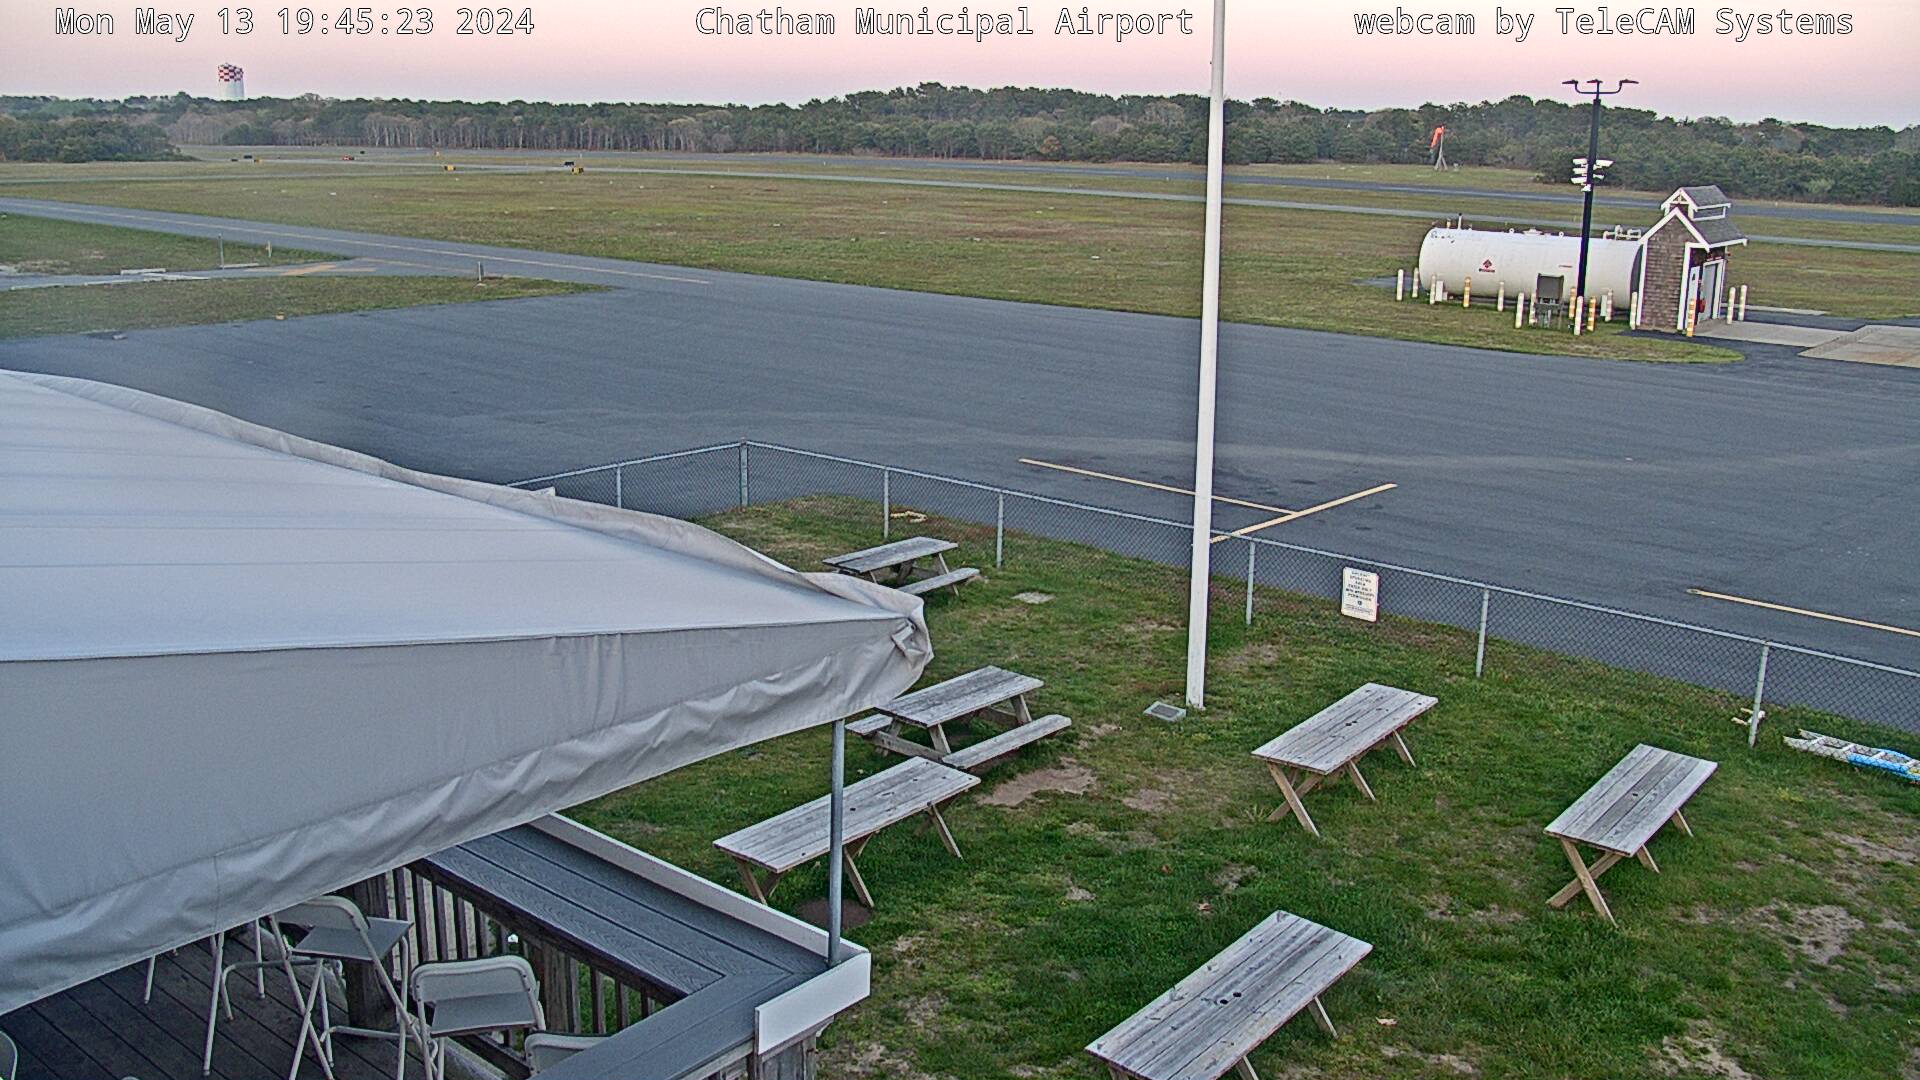 USA Chatham Open air cafe at the airport webcam